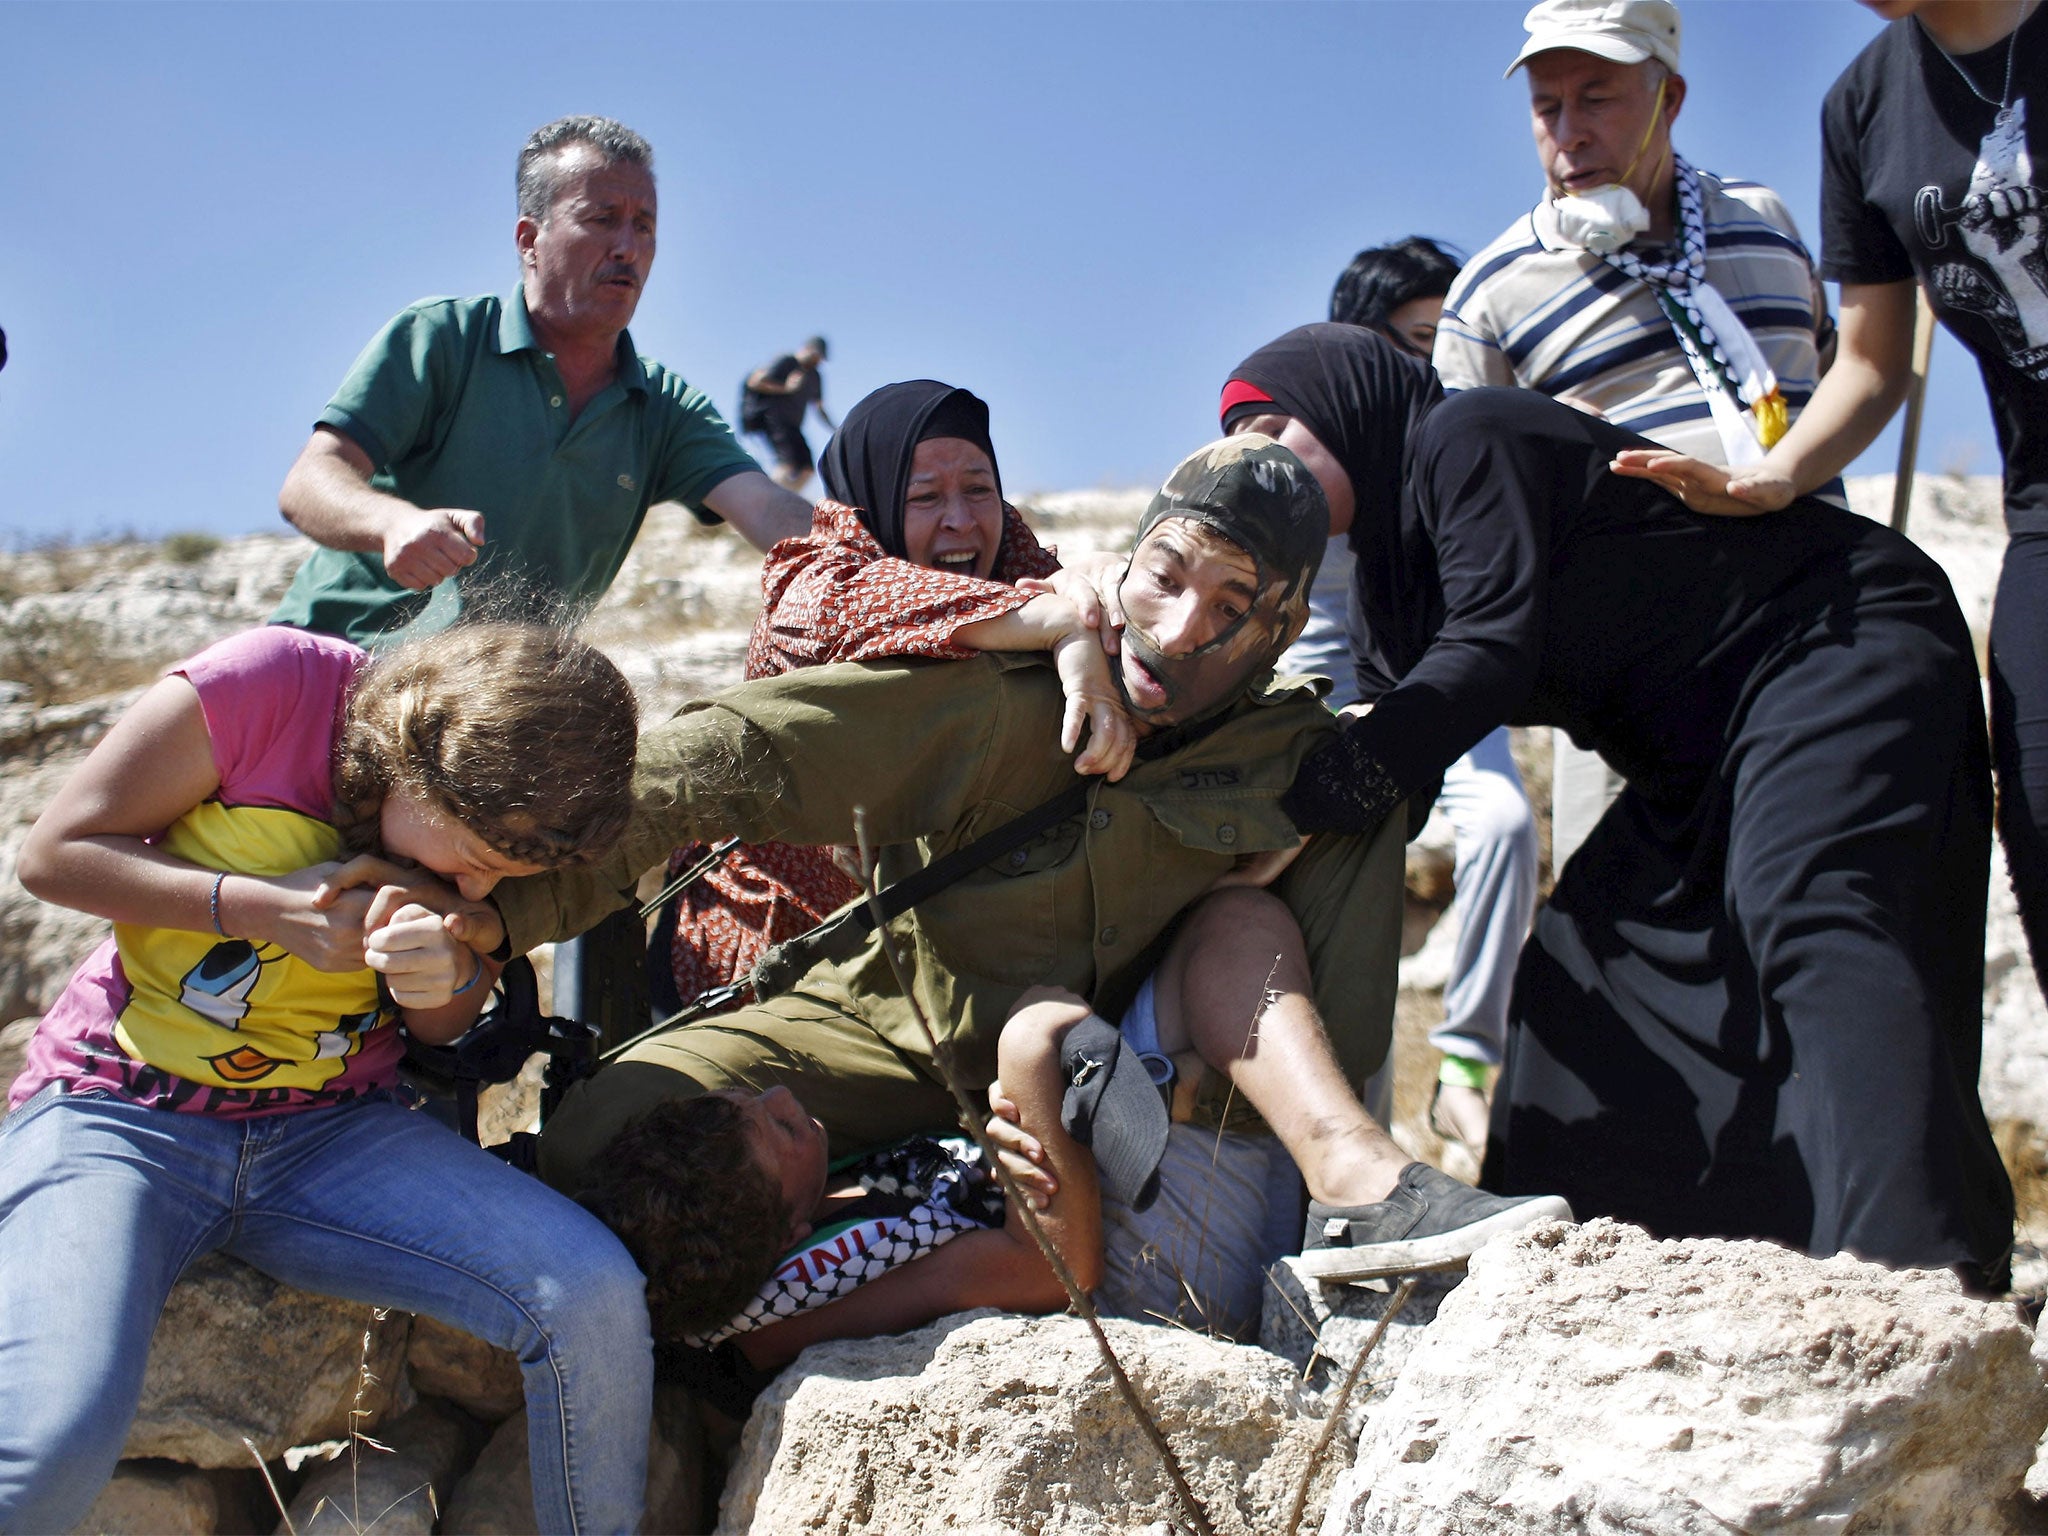 The young girl can be seen biting the Israeli soldier's hand